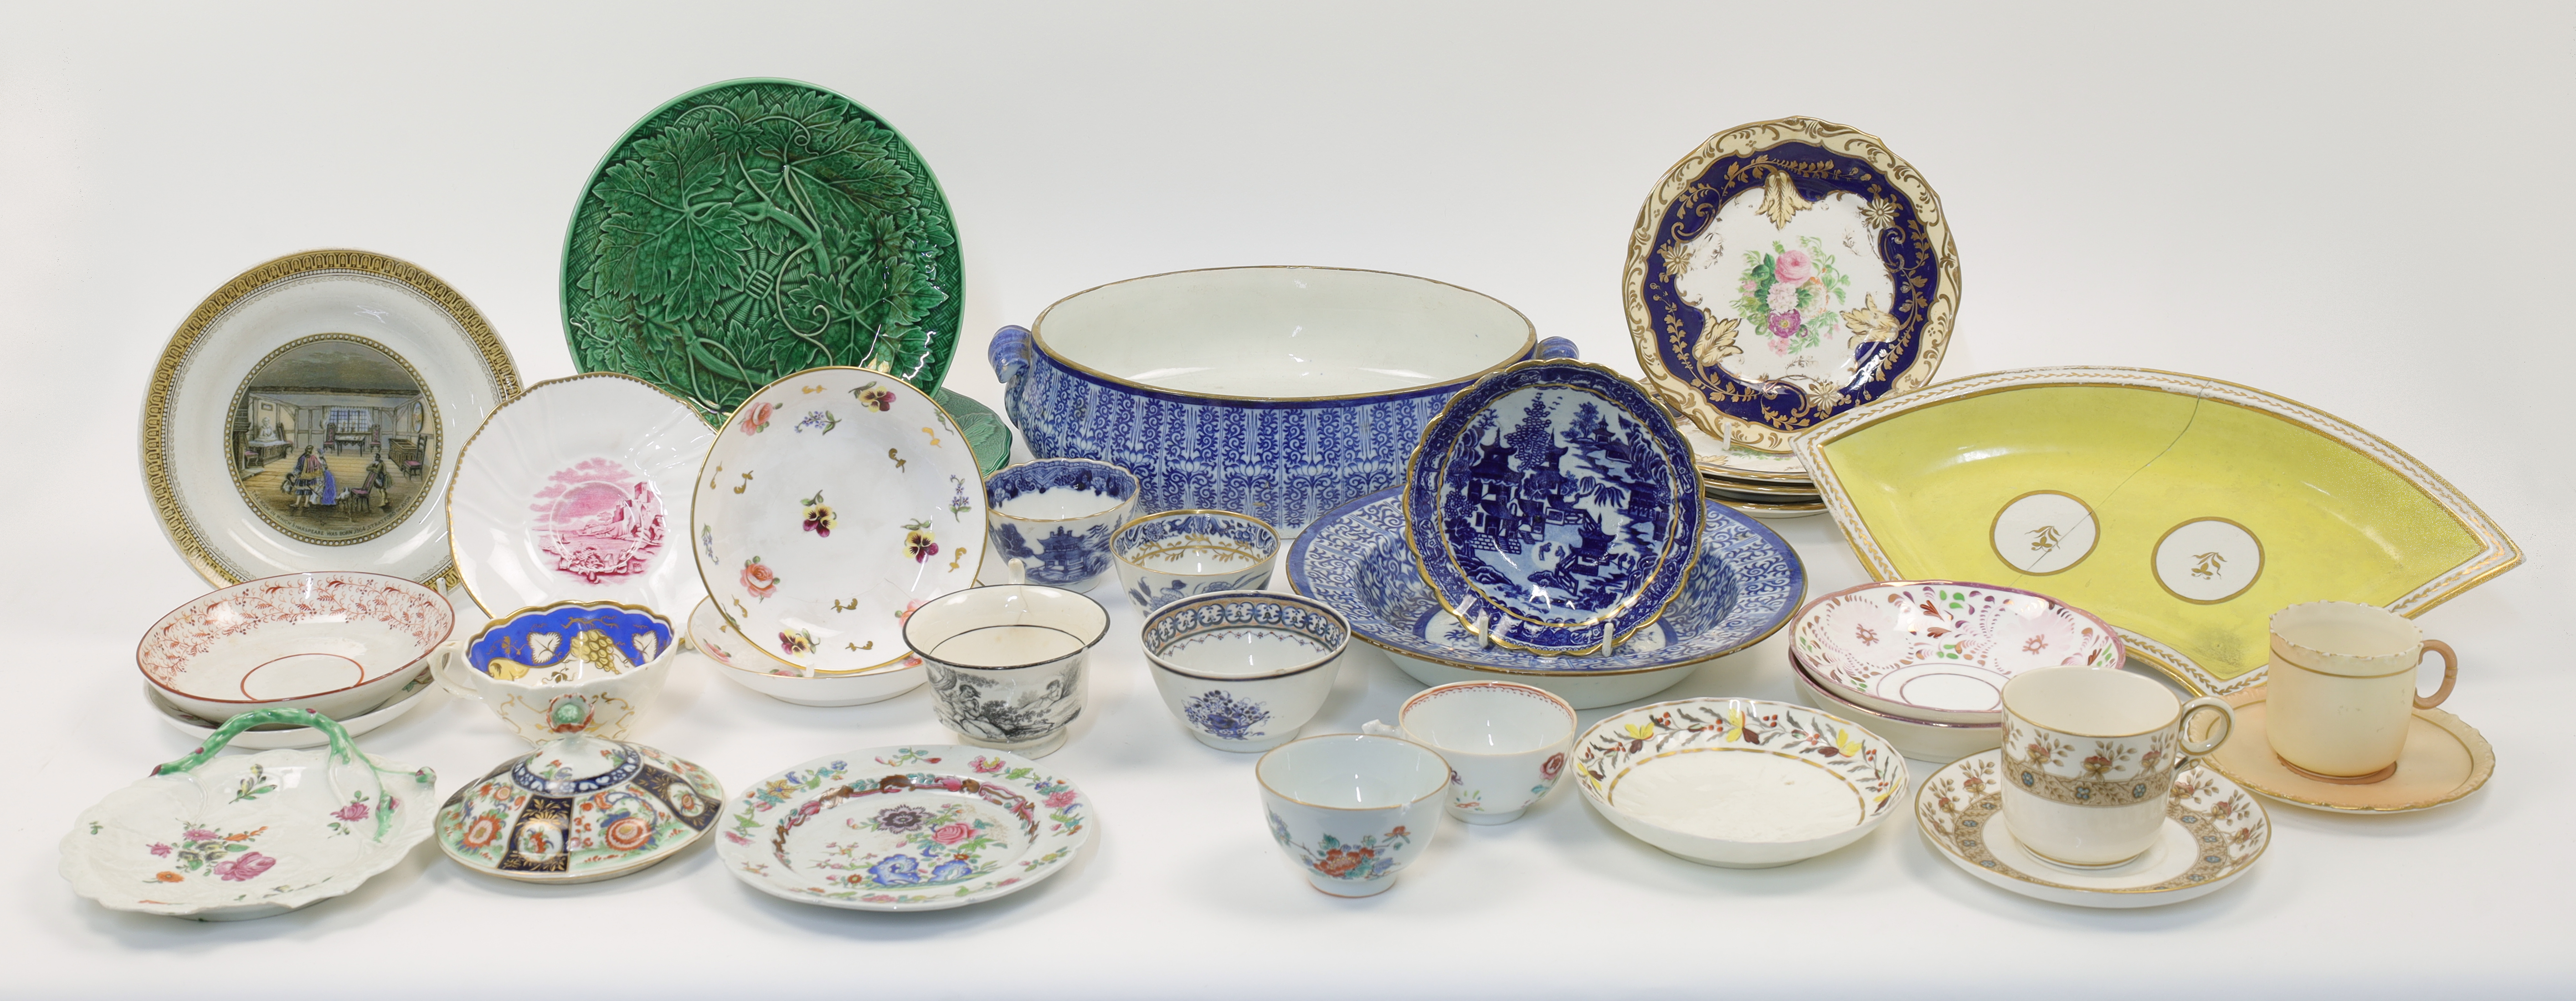 A quantity of miscellaneous porcelain tablewares, 19th - 20th centuries, various makers and regio... - Image 2 of 2